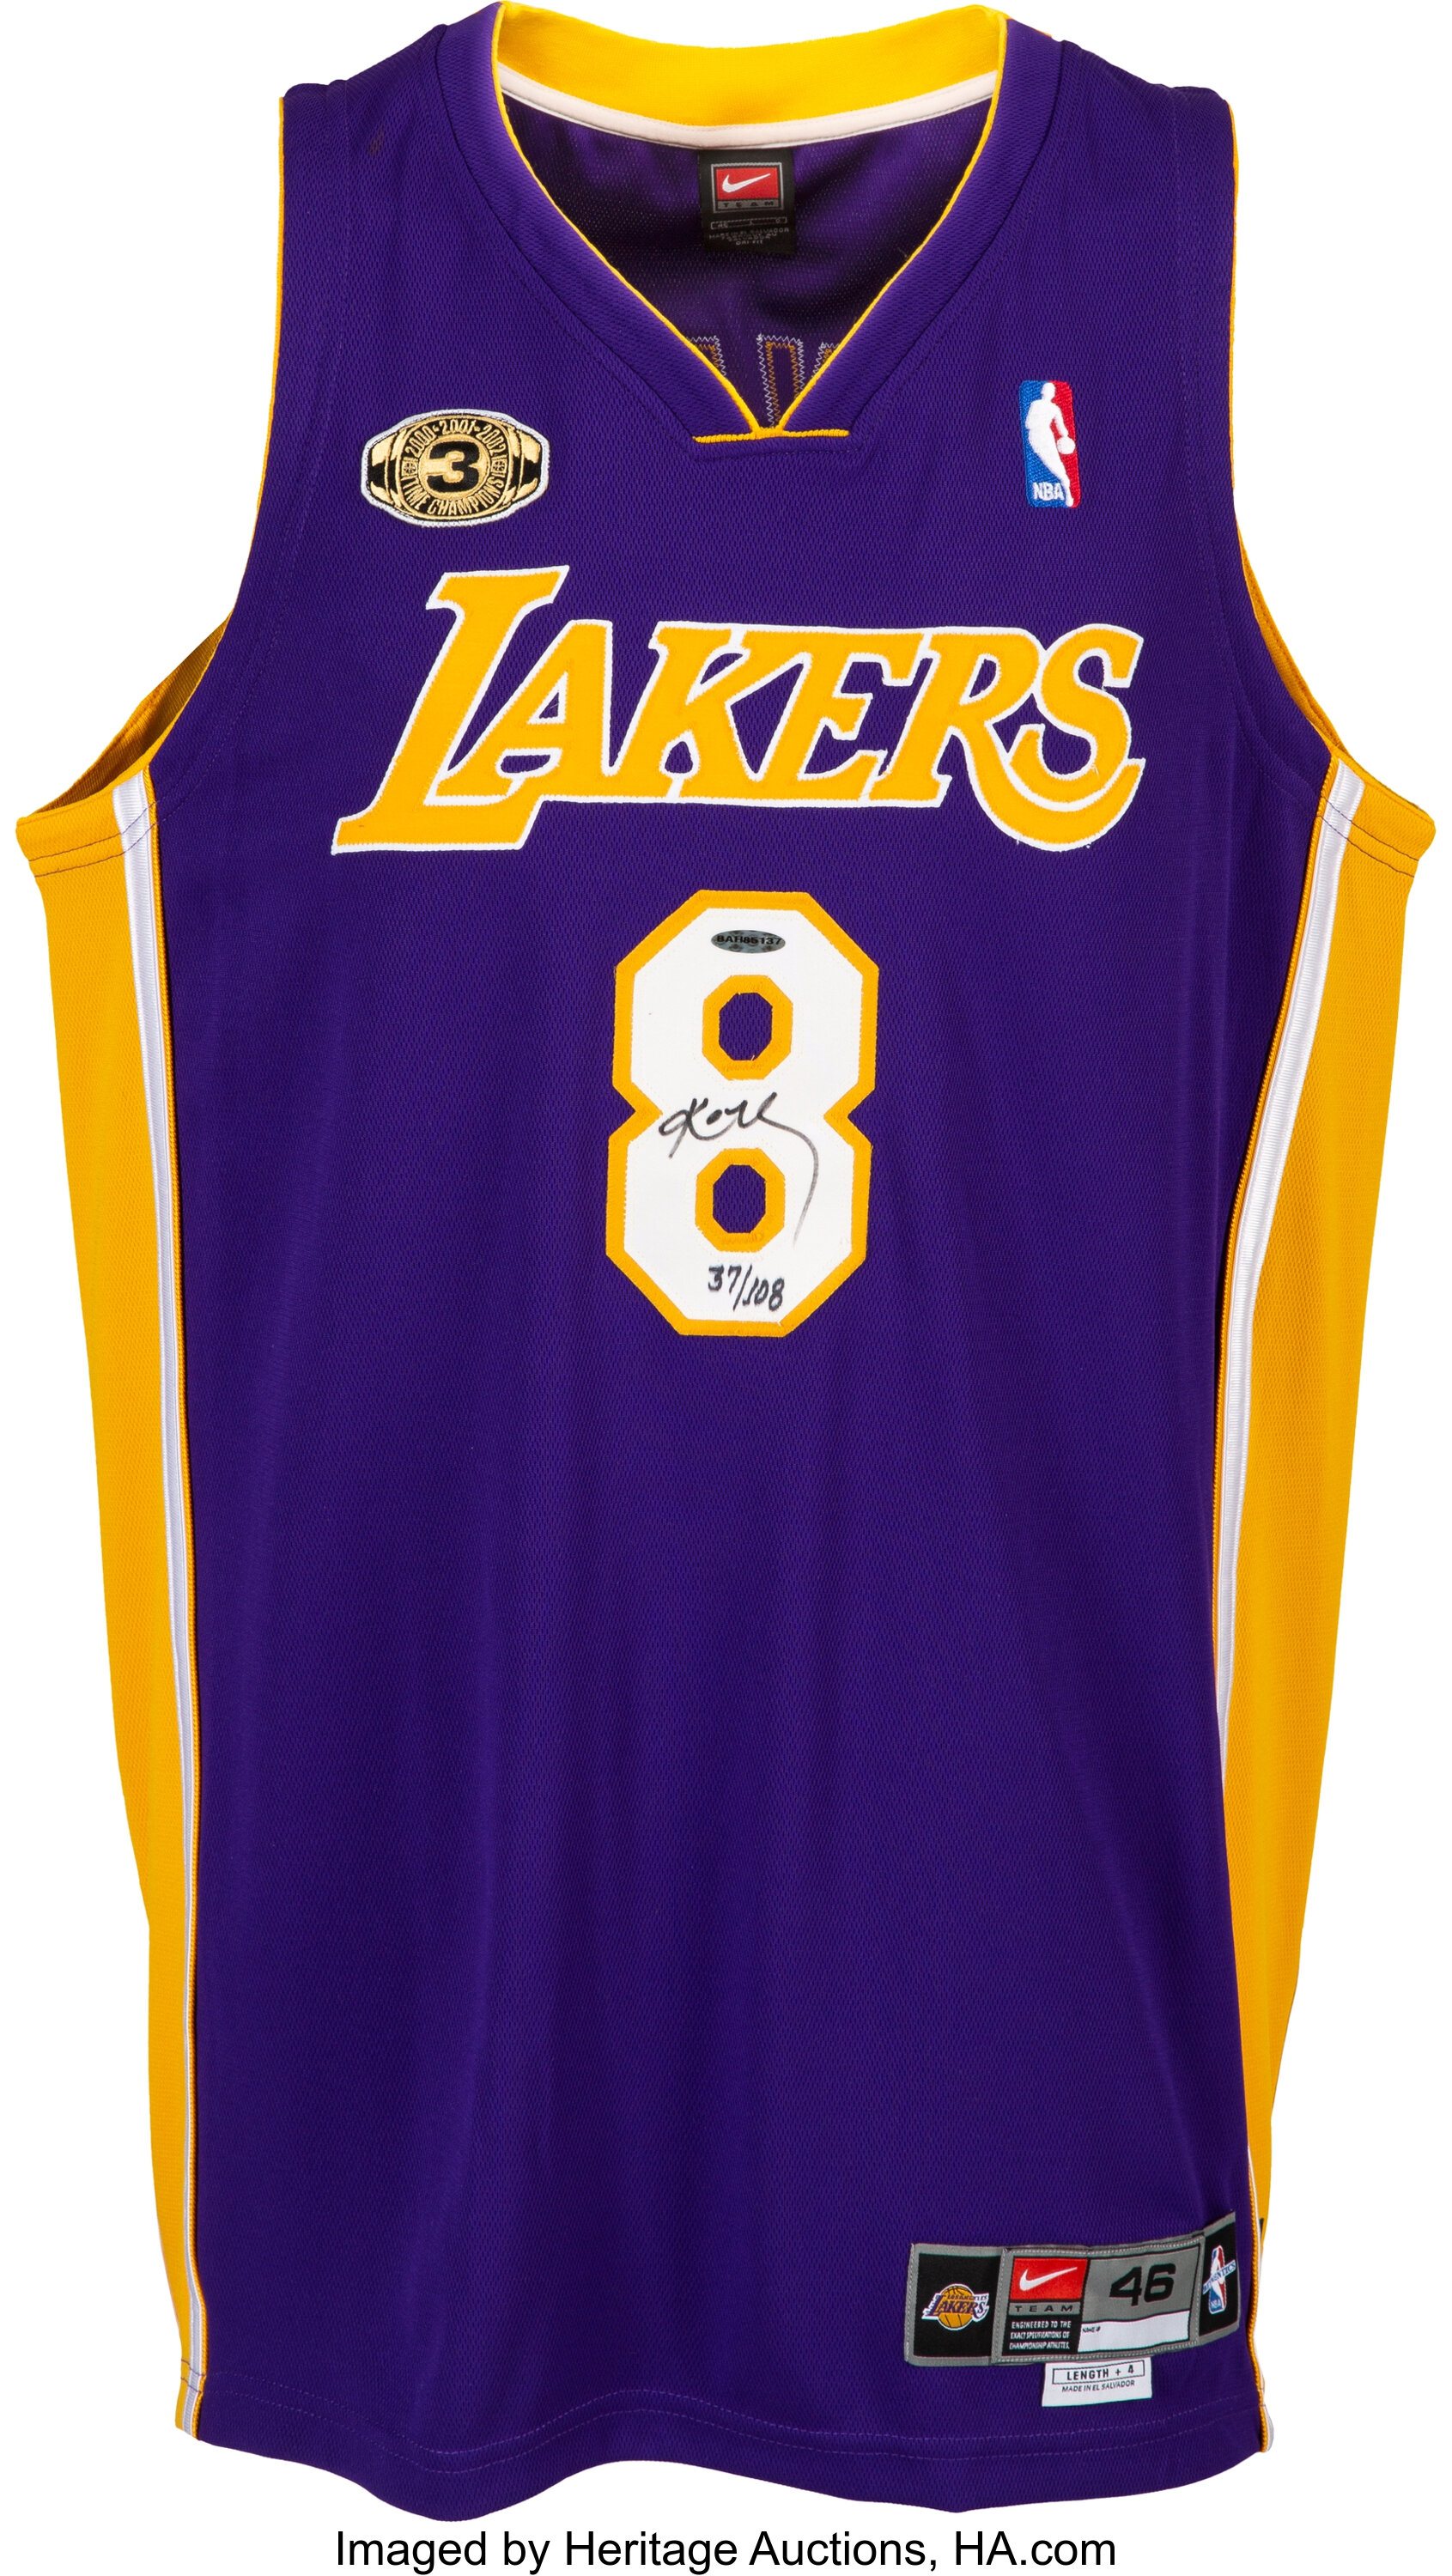 Los Angeles Lakers Official Primary Team Logo Patch Jersey Kobe Bryant